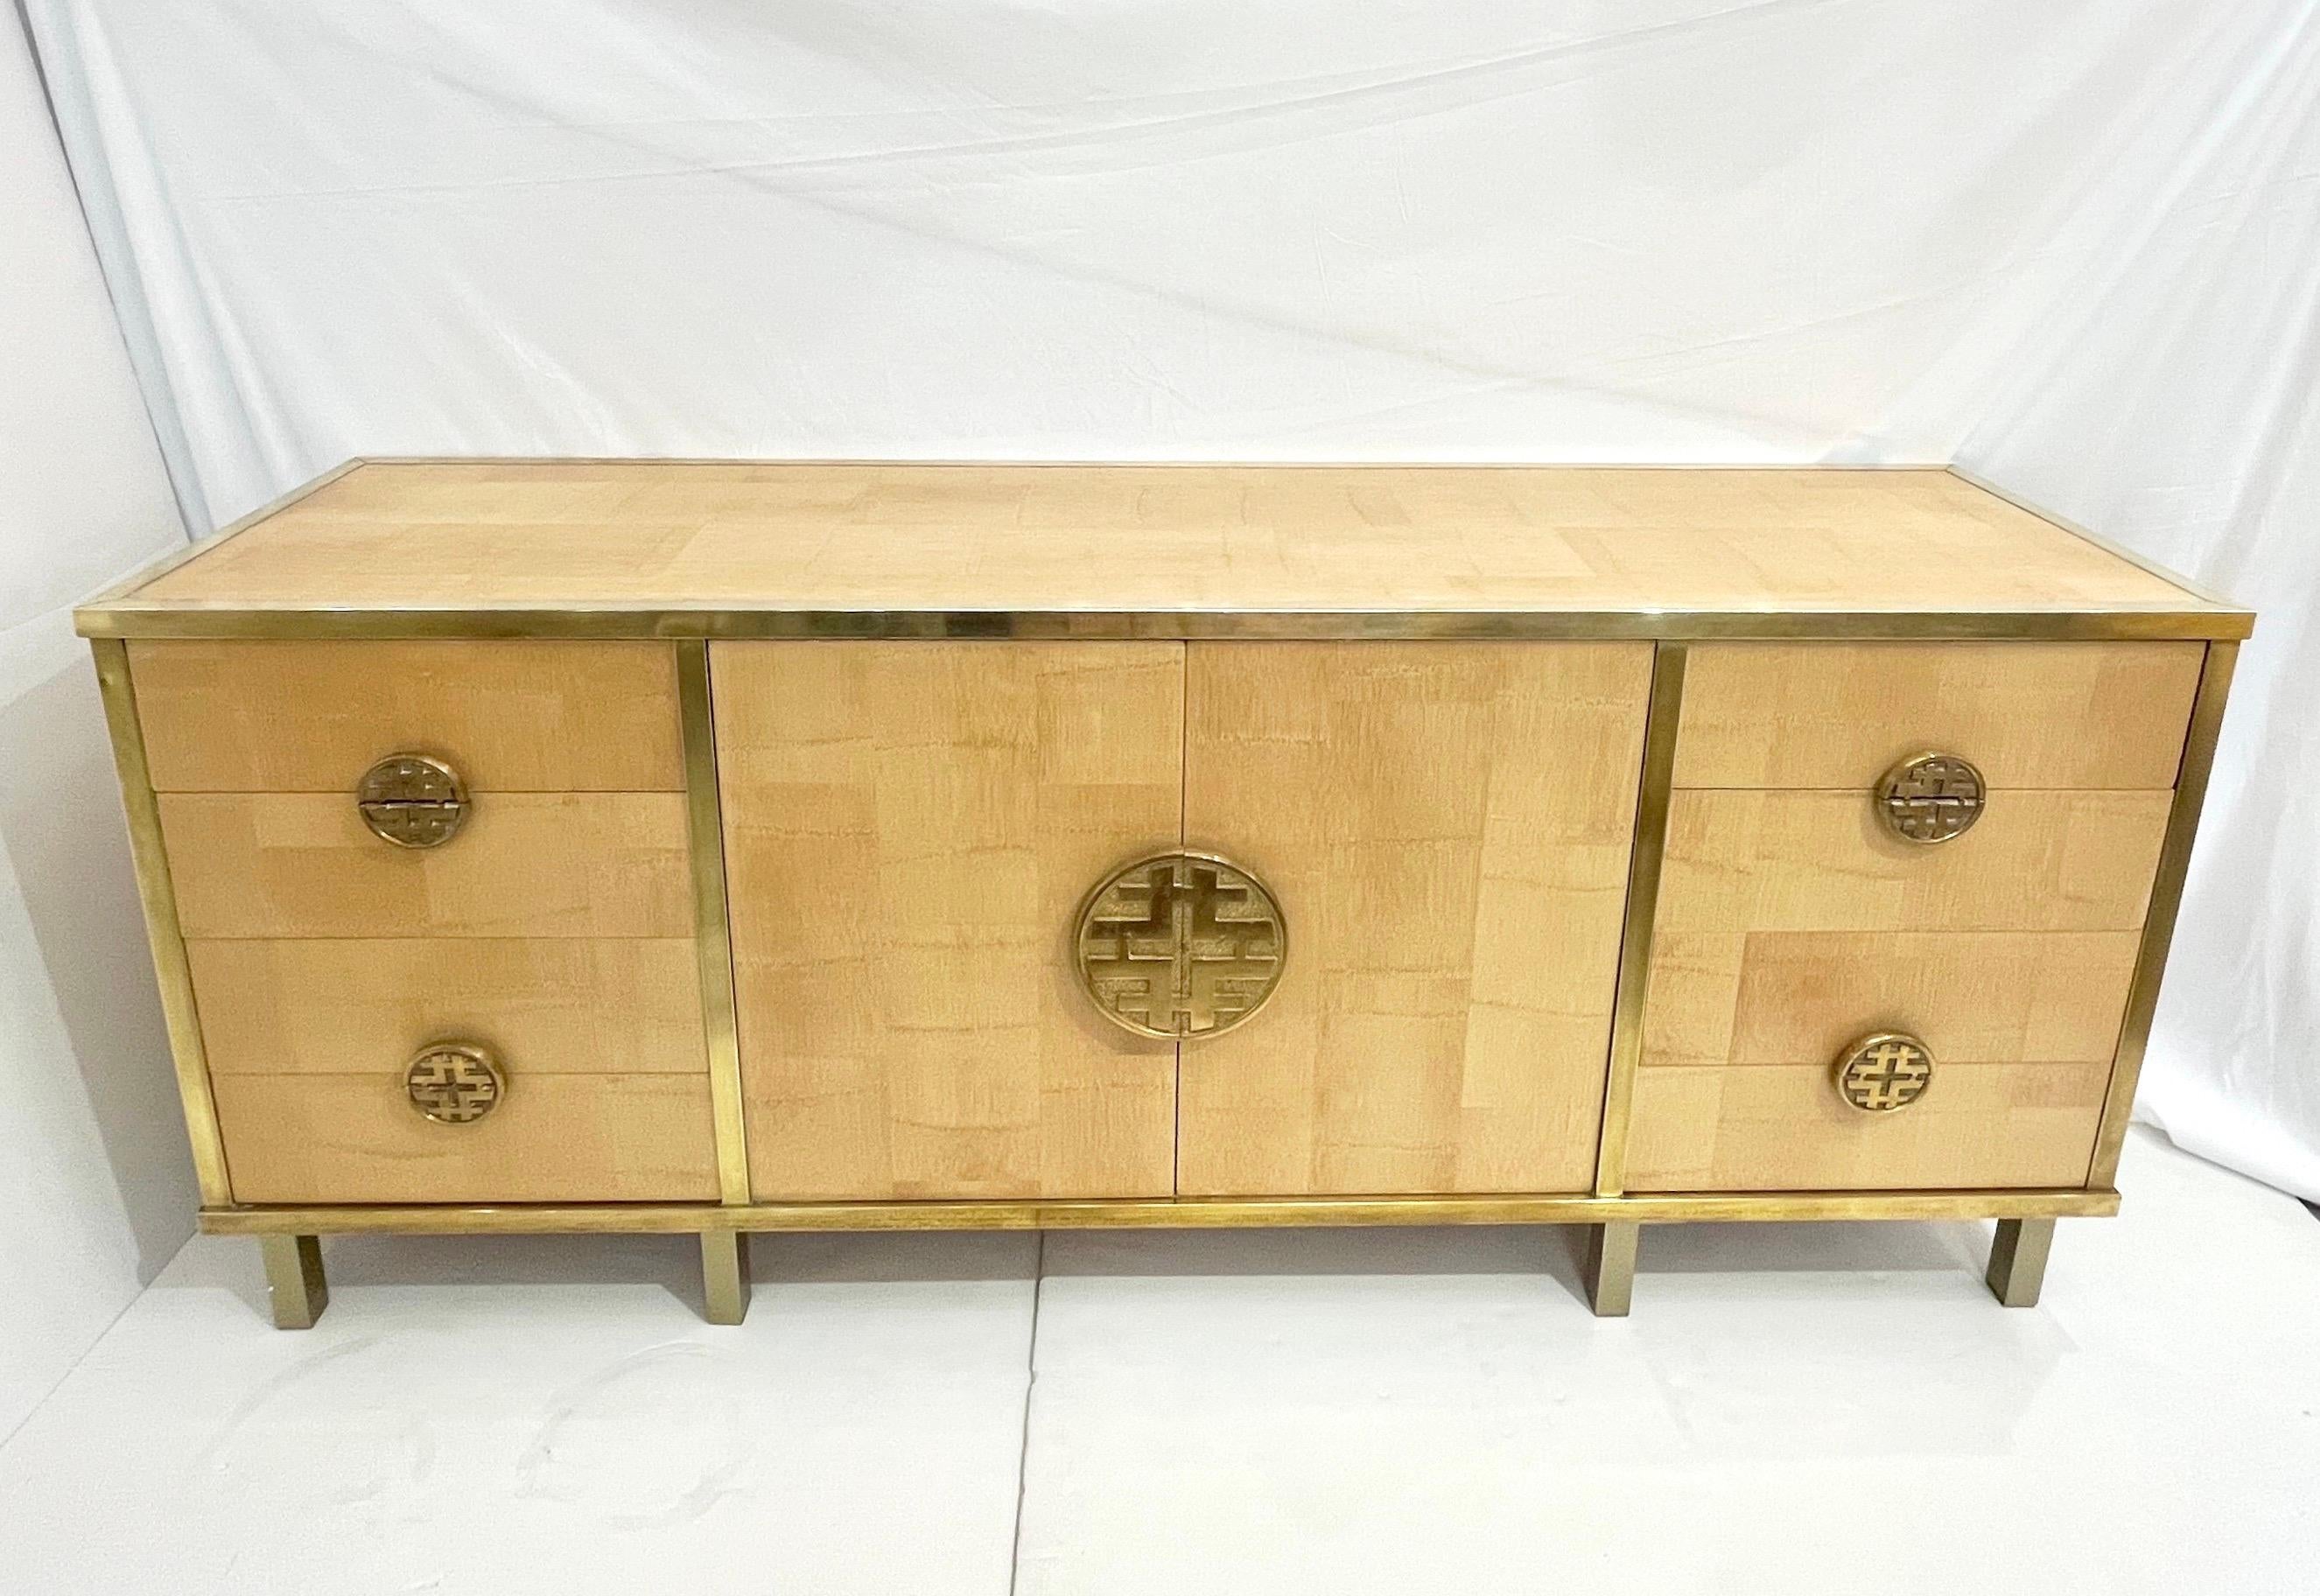 One-of-a-kind midcentury Italian dresser/credenza by the Architect Giacomo Sinopoli, in rare organic solid palm wood, with a Chinoiserie style, high-quality execution with a central door, and four drawers on each side, decorated with handles that